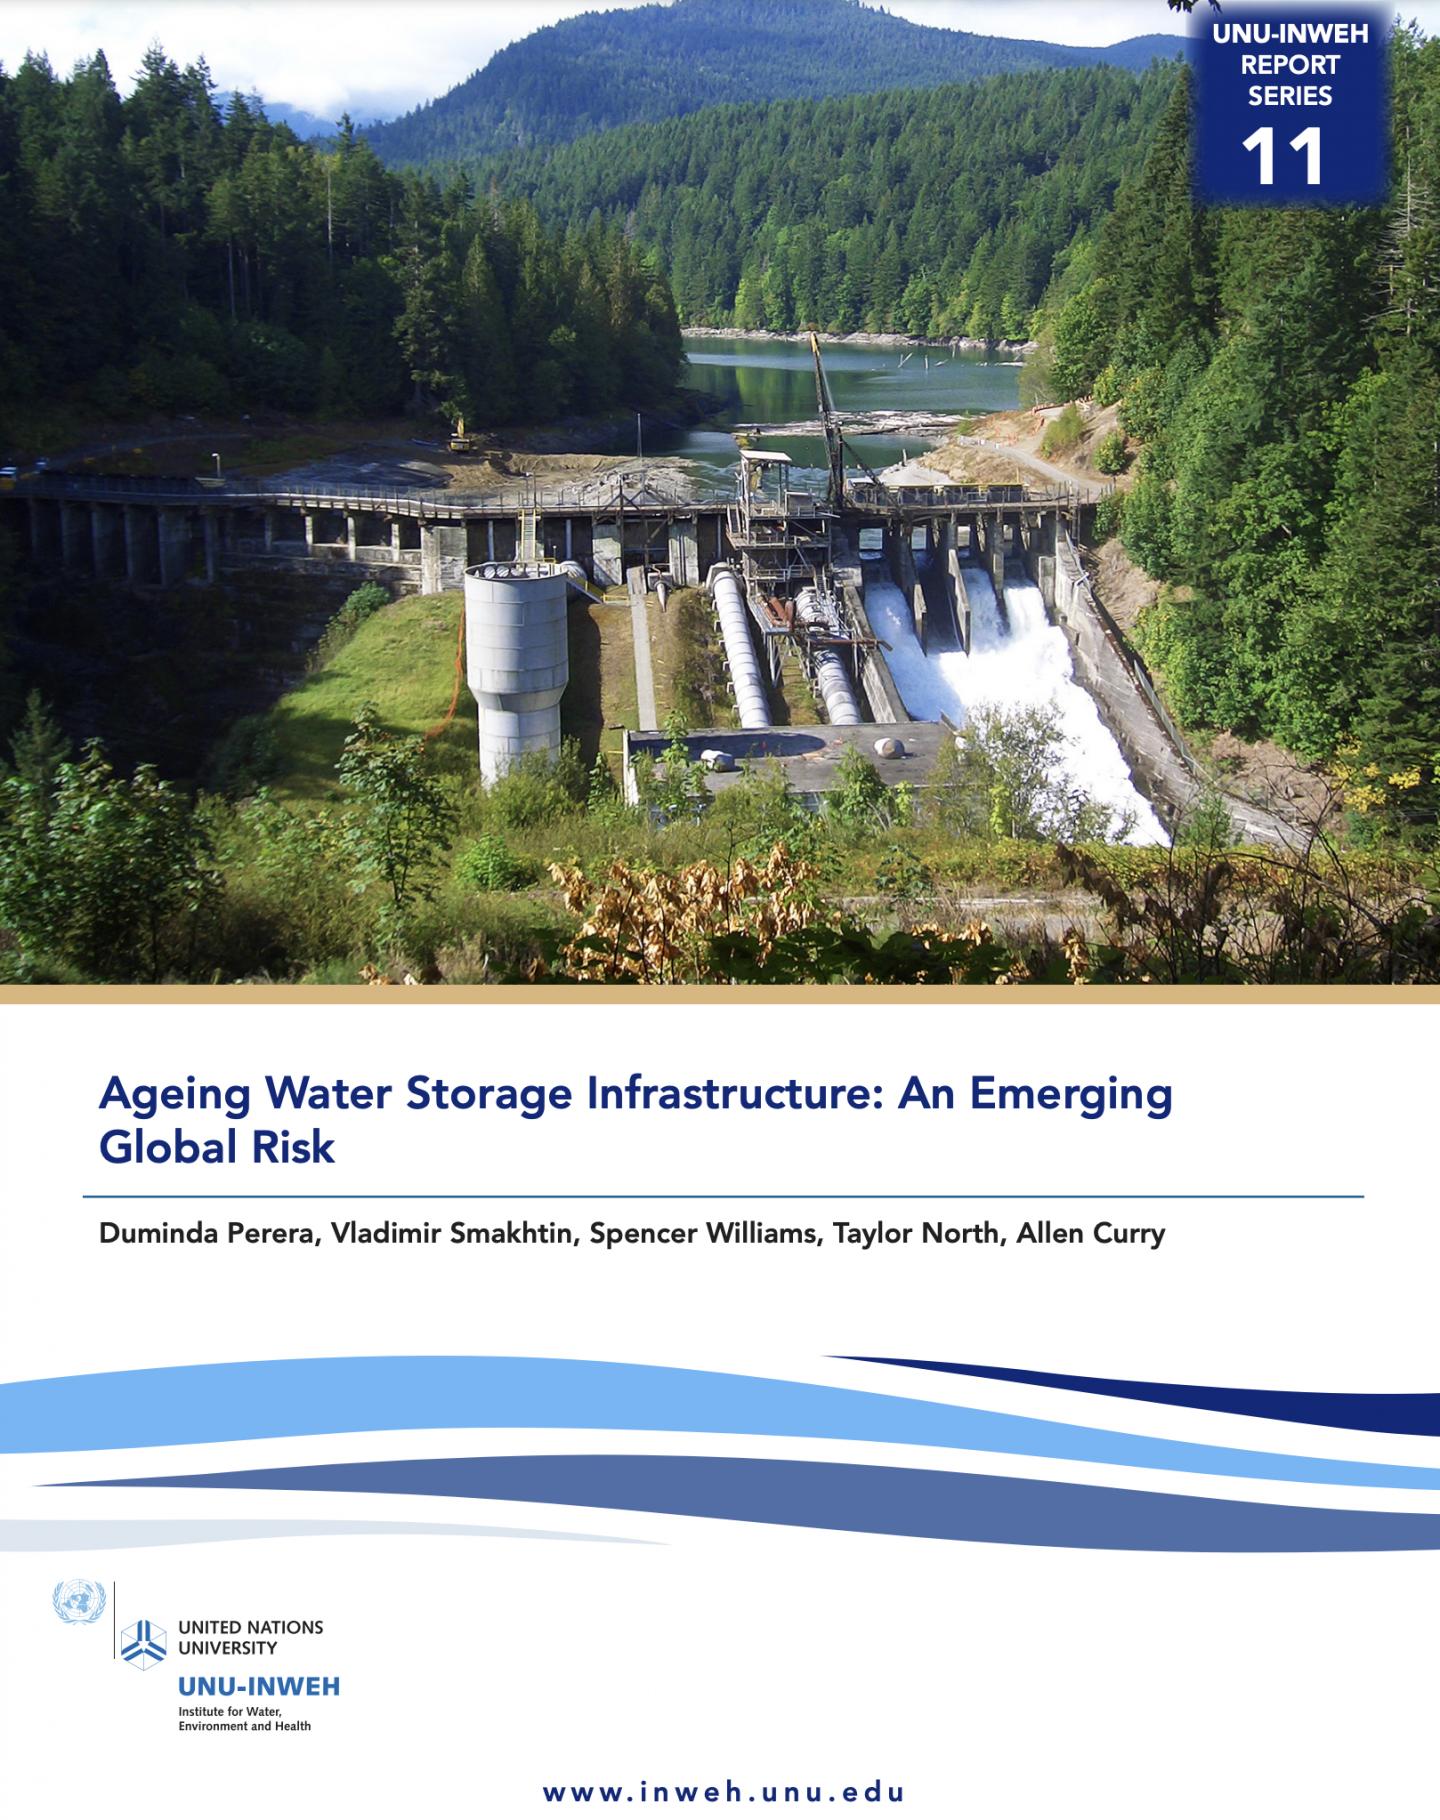 Ageing water infrastructure: An emerging global risk